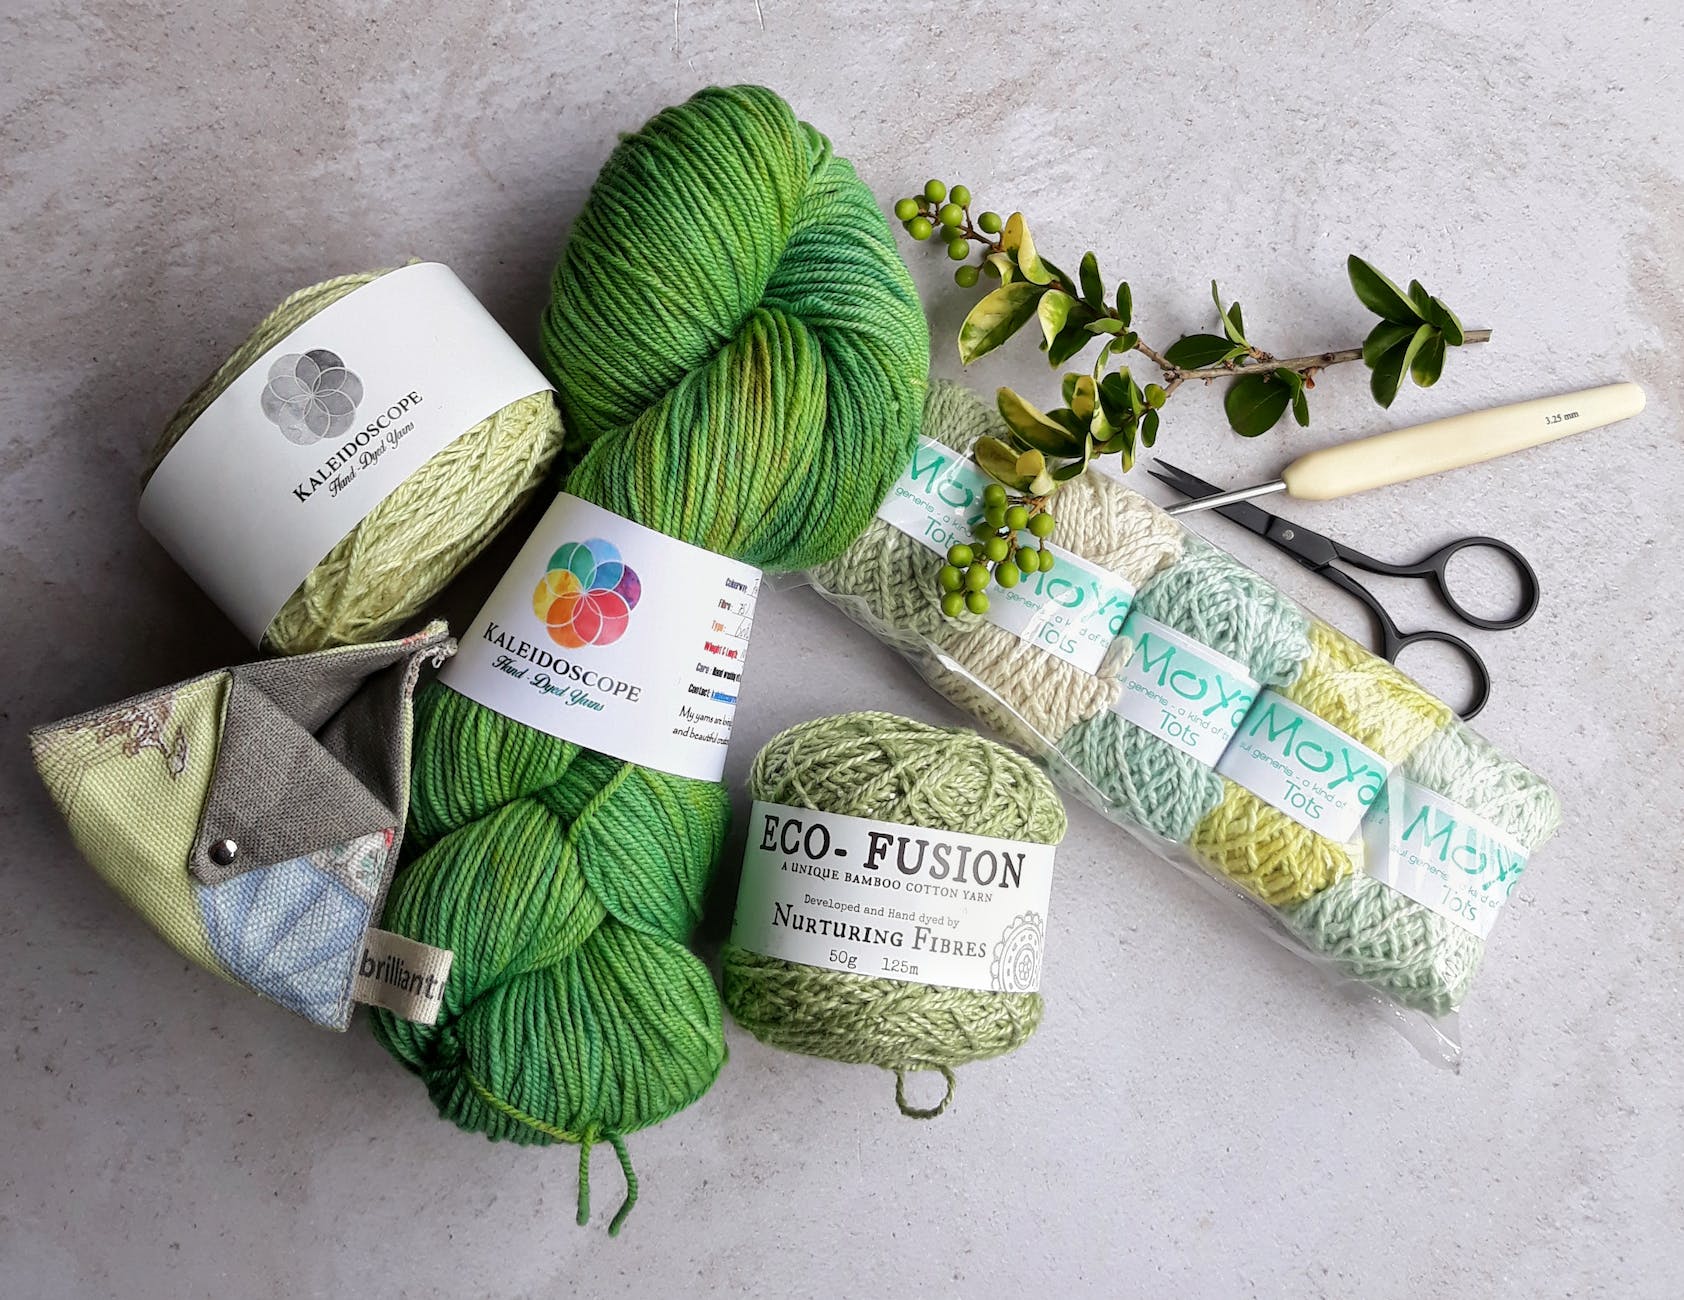 Crocheting with Plant Fibers: Exploration of Cotton, Linen, Hemp and More